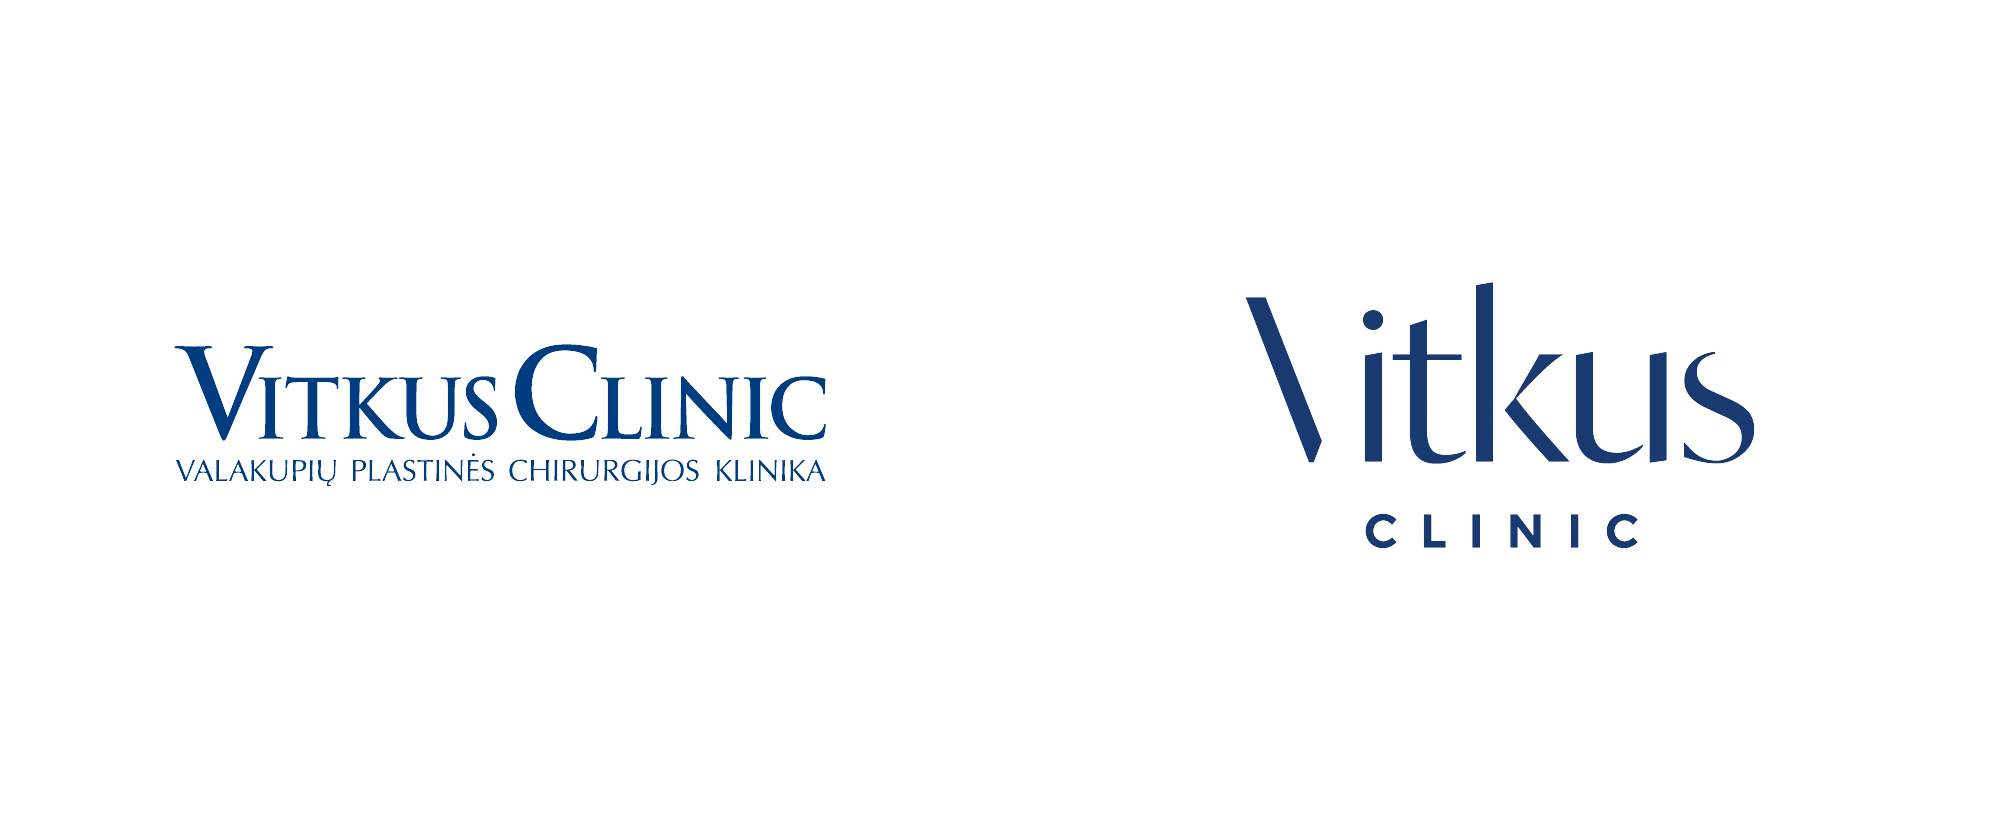 New Logo and Identity for Vitkus Clinic by Tandemo